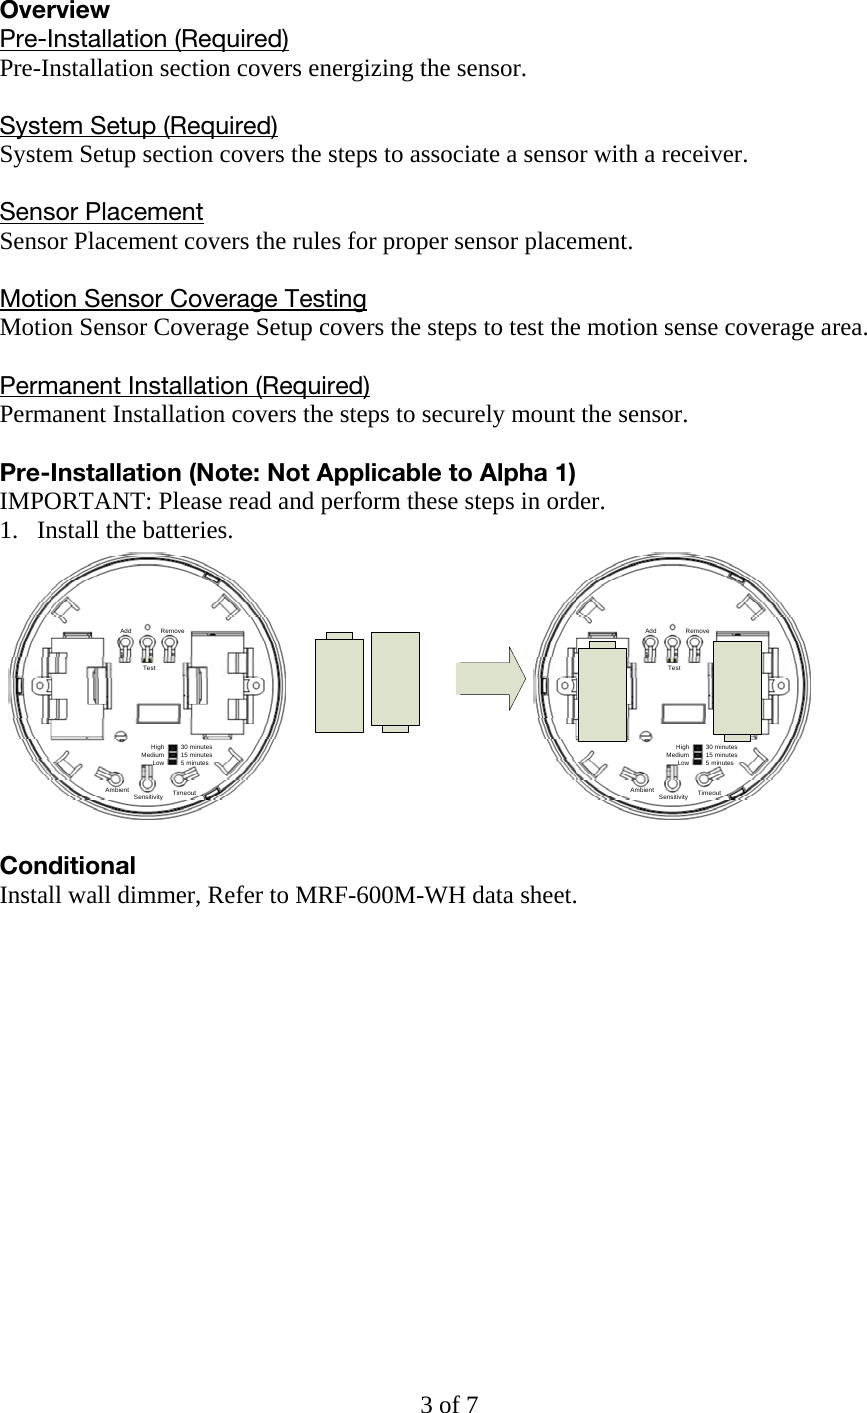 Overview Pre-Installation (Required) Pre-Installation section covers energizing the sensor.  System Setup (Required) System Setup section covers the steps to associate a sensor with a receiver.  Sensor Placement Sensor Placement covers the rules for proper sensor placement.  Motion Sensor Coverage Testing Motion Sensor Coverage Setup covers the steps to test the motion sense coverage area.  Permanent Installation (Required) Permanent Installation covers the steps to securely mount the sensor.  Pre-Installation (Note: Not Applicable to Alpha 1) IMPORTANT: Please read and perform these steps in order. 1. Install the batteries. Add RemoveTestAmbient Sensitivity TimeoutHighMediumLow30 minutes15 minutes5 minutesAdd RemoveTestAmbient Sensitivity TimeoutHighMediumLow30 minutes15 minutes5 minutes Conditional  Install wall dimmer, Refer to MRF-600M-WH data sheet.3 of 7 